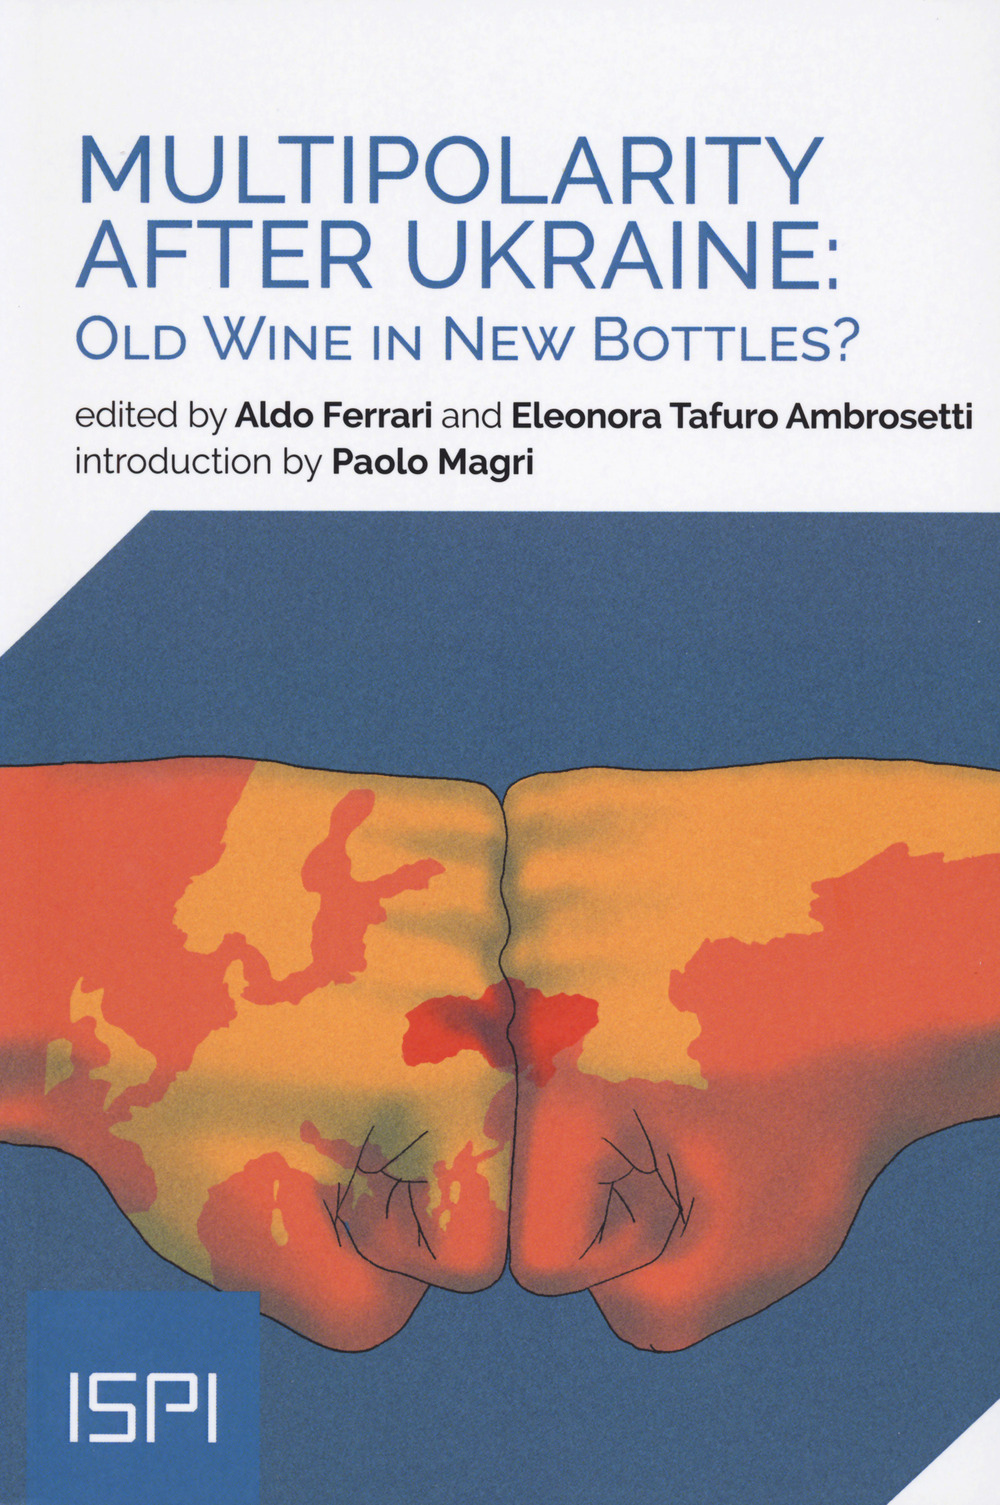 Multipolarity after Ukraine: old wines in new bottles?